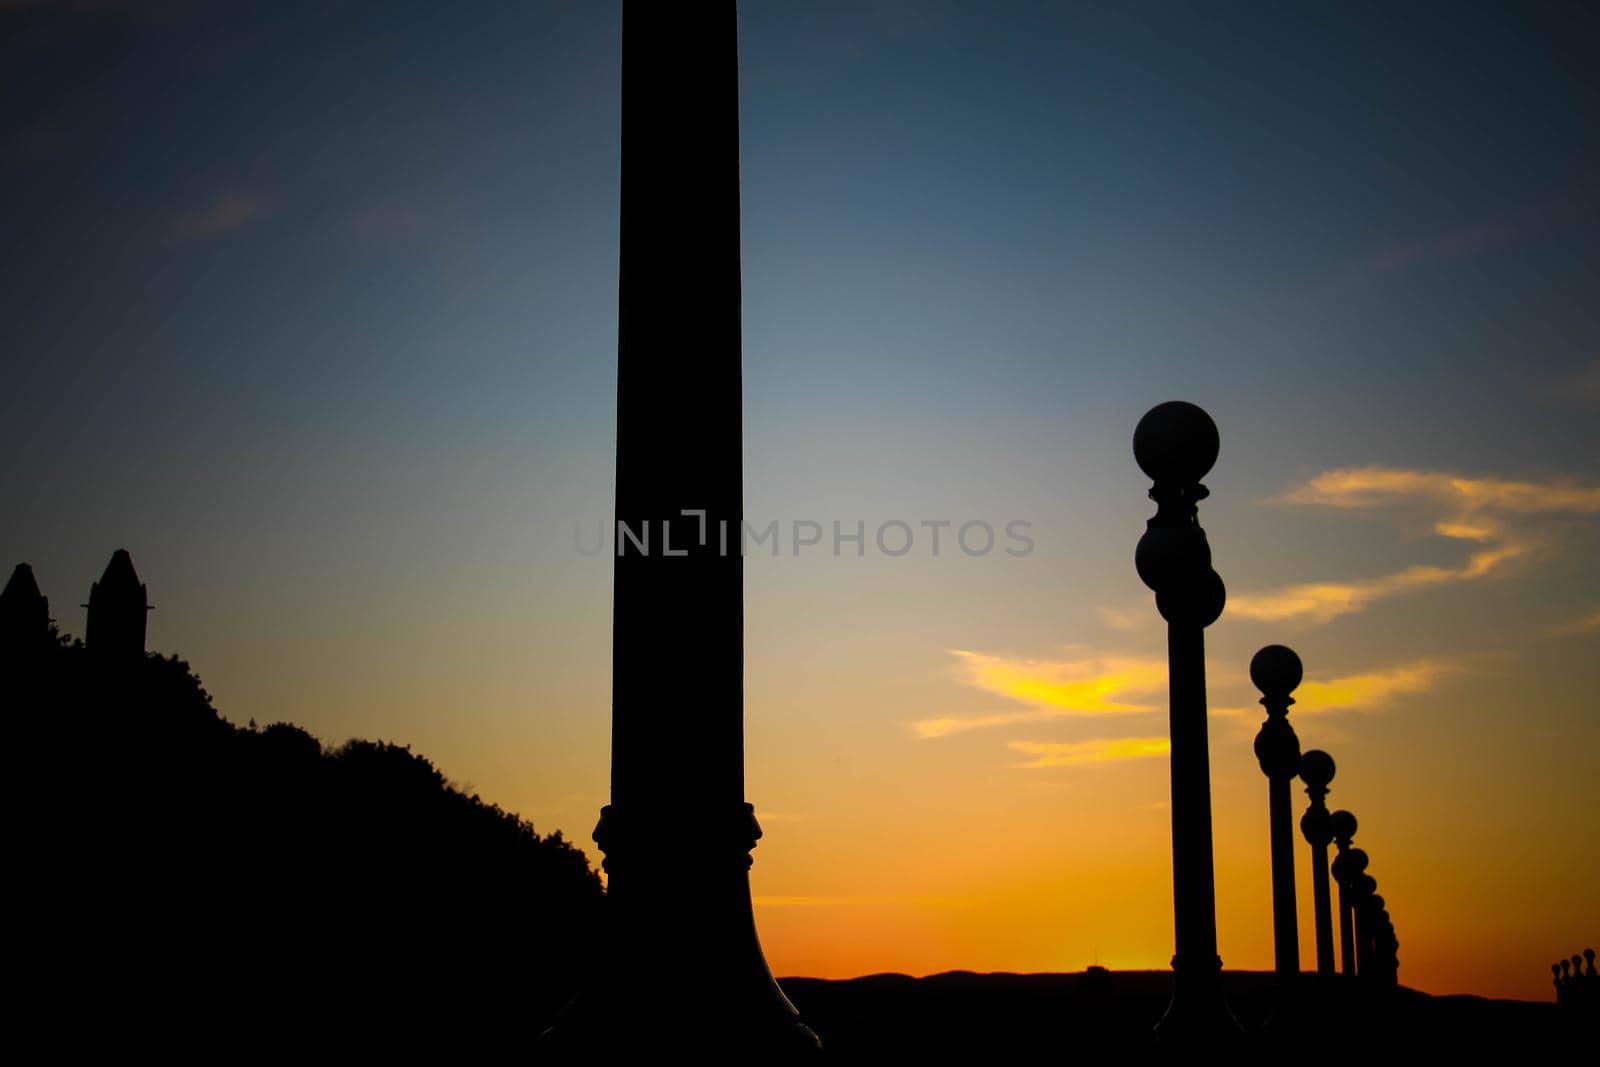 Silhouette of street lanterns with sunset sky. Silhouette of a street lamp post during a beautiful sunset. by JuliaDorian